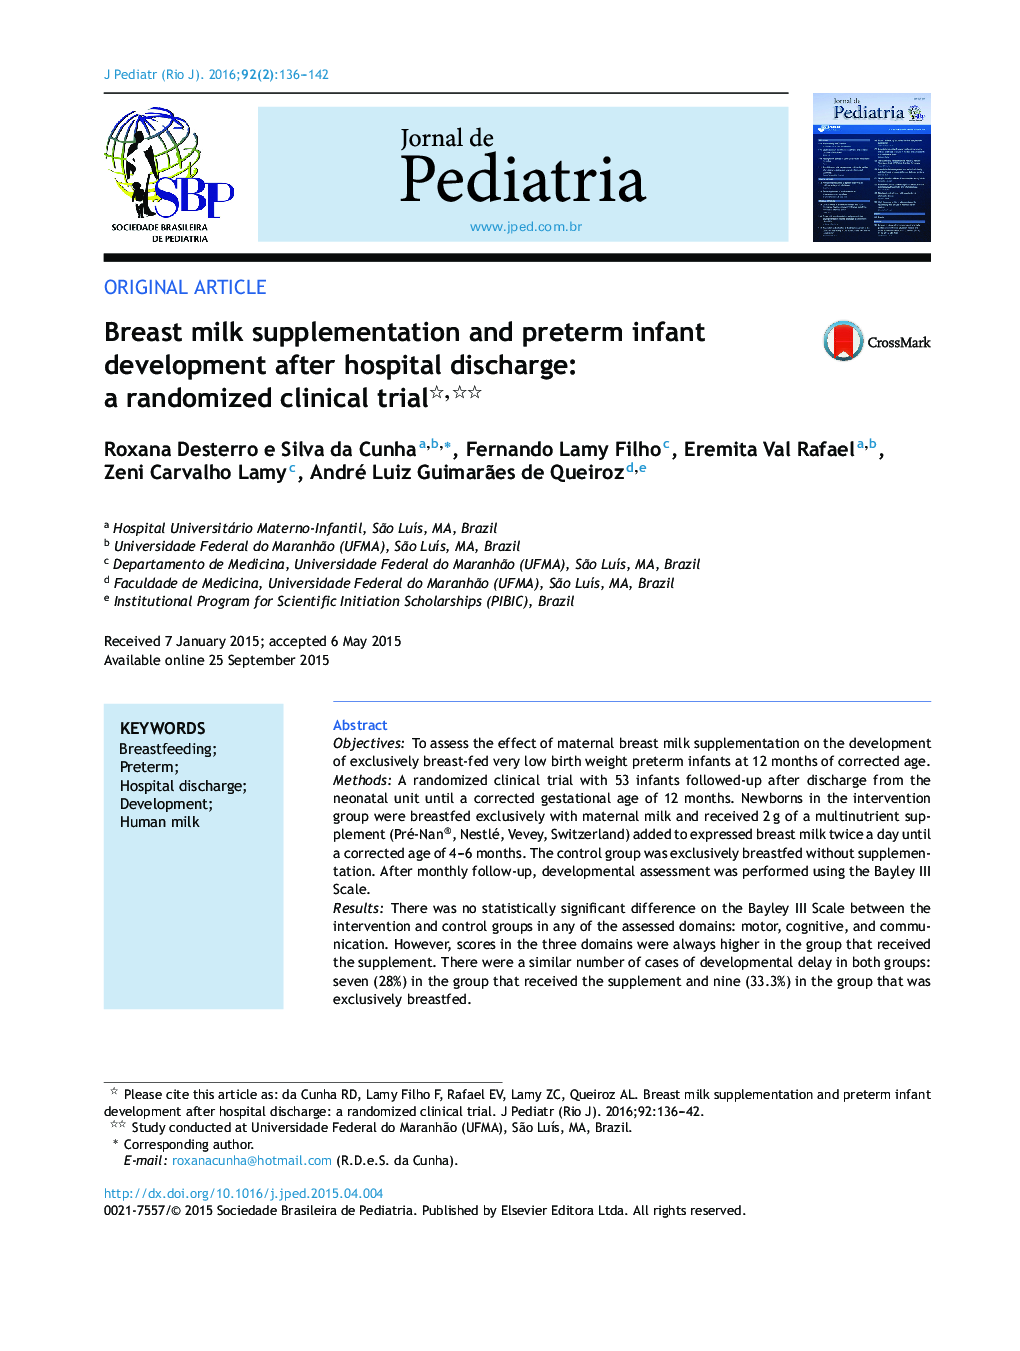 Breast milk supplementation and preterm infant development after hospital discharge: a randomized clinical trial 